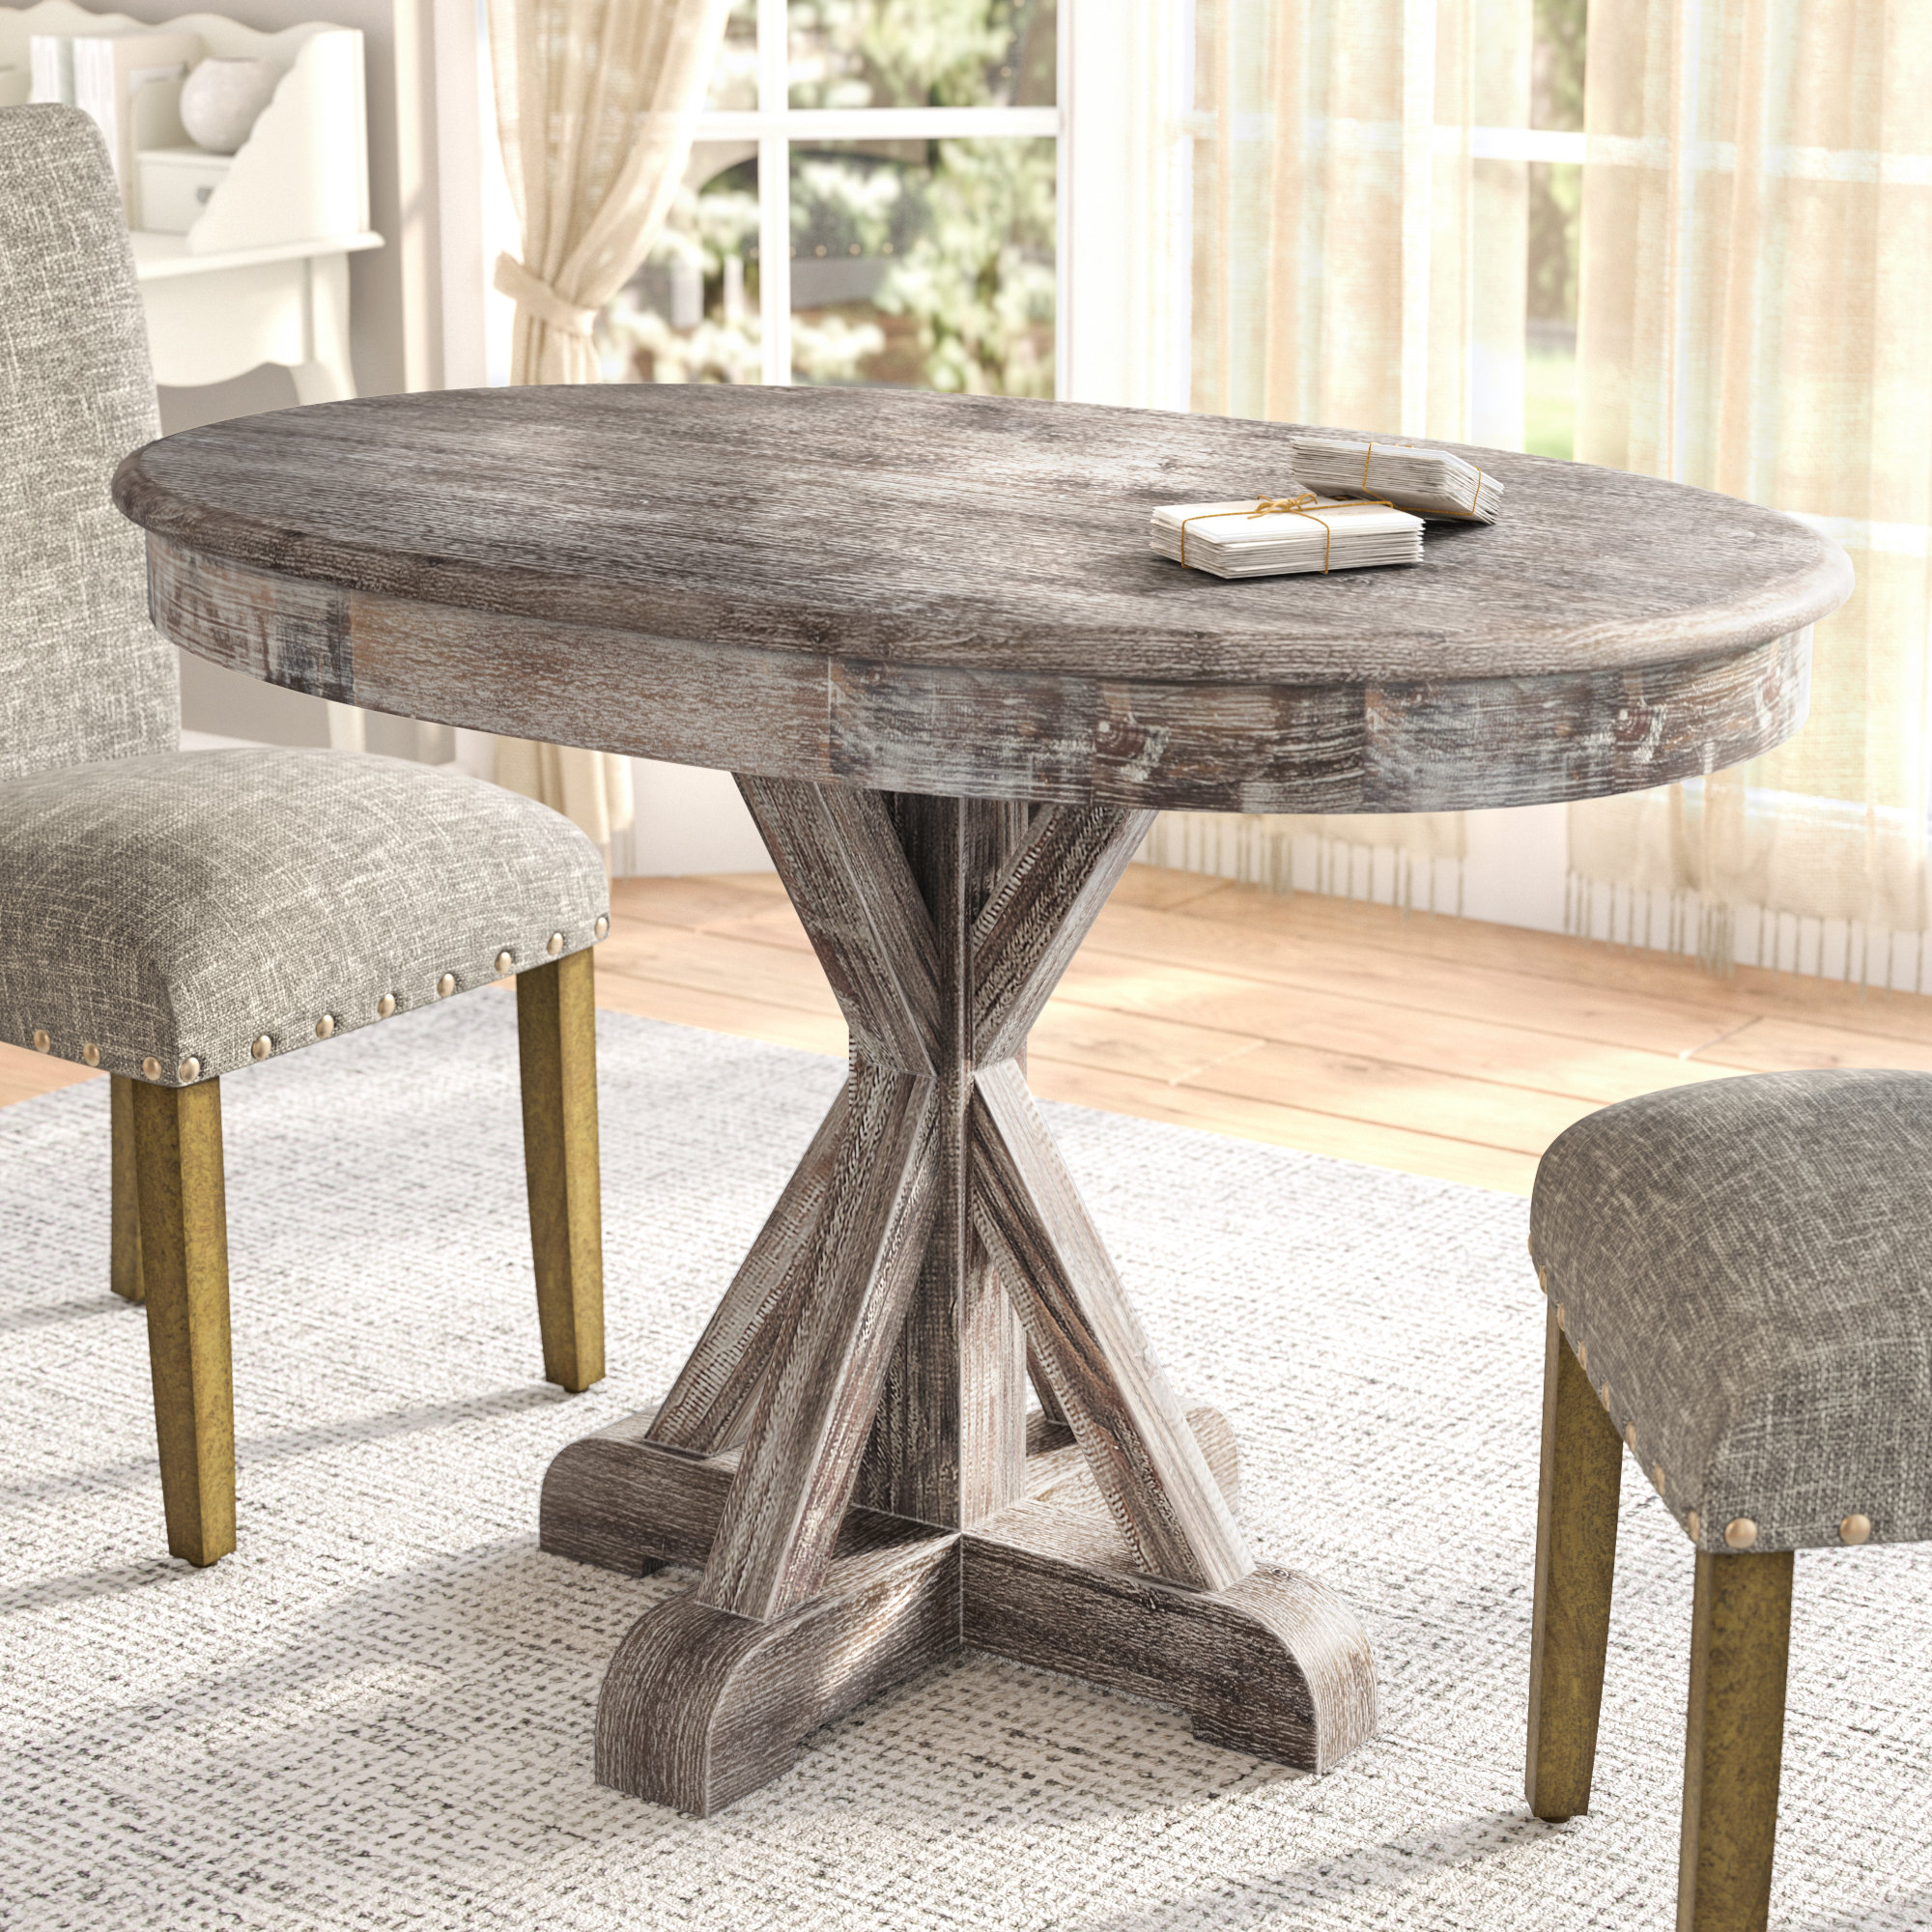 Oval Dining Table Decorating Ideas